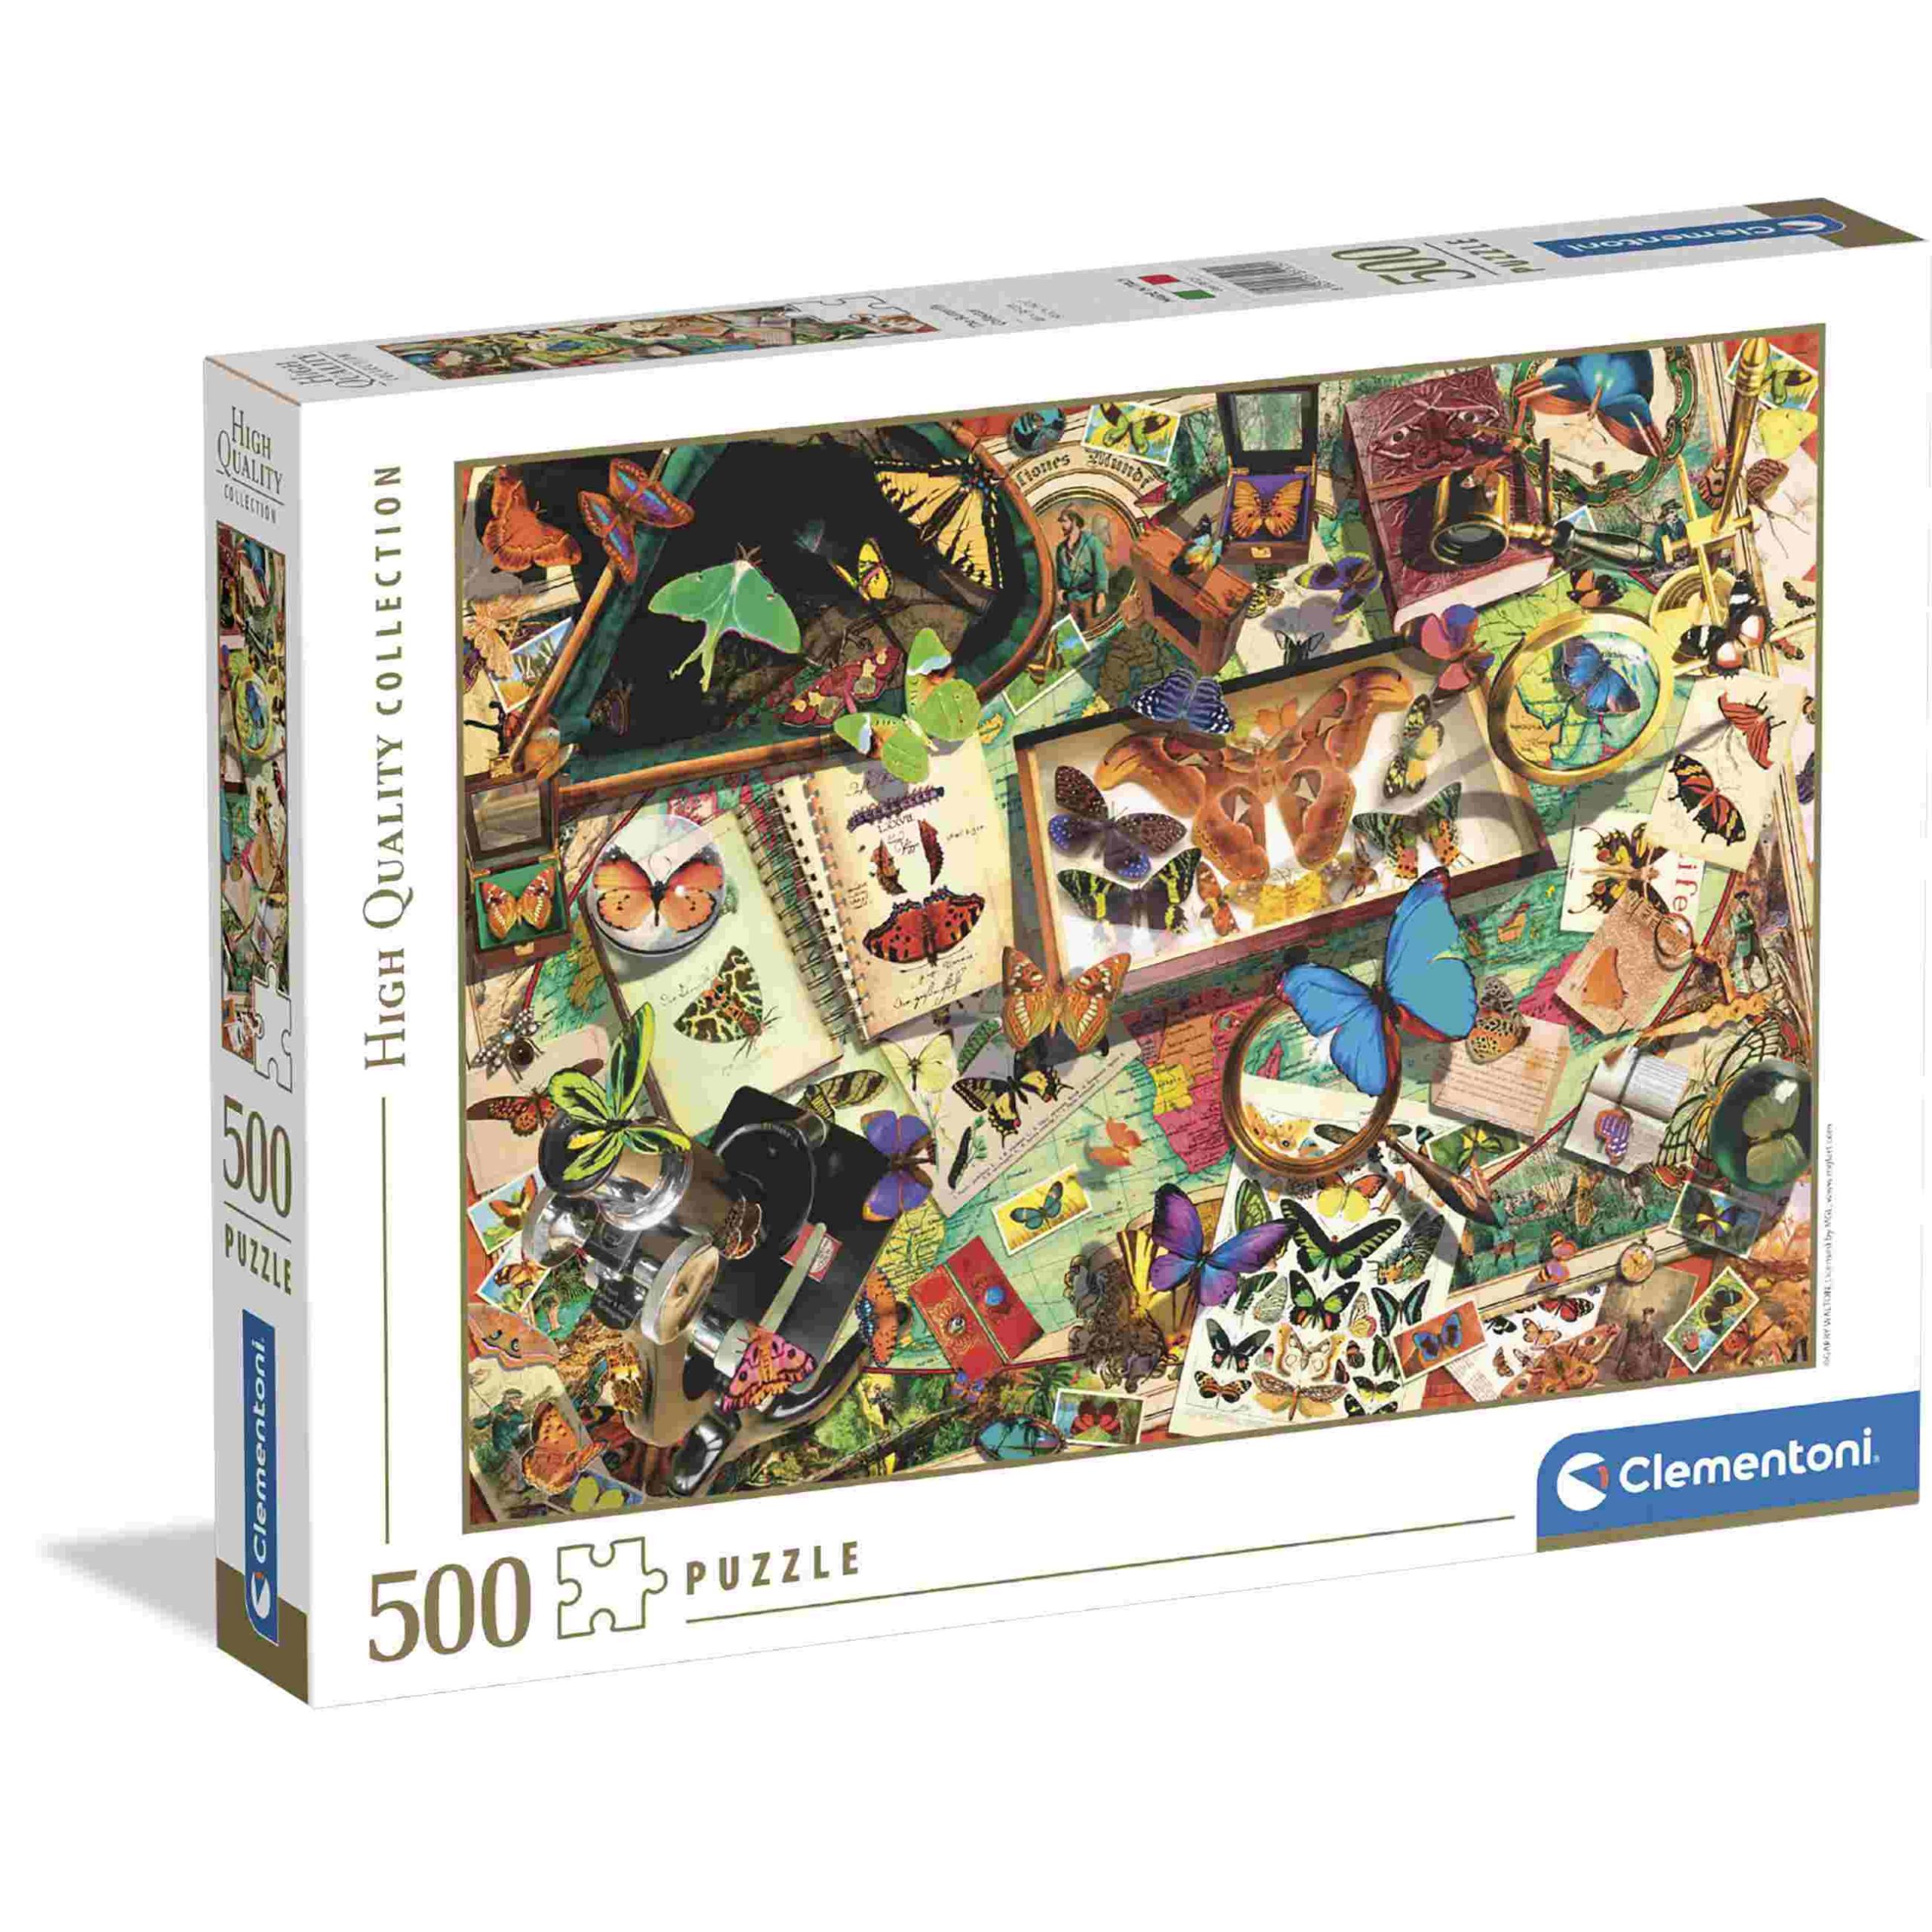 Clementoni puzzle the butterfly collector - 500 pezzi - CLEMENTONI